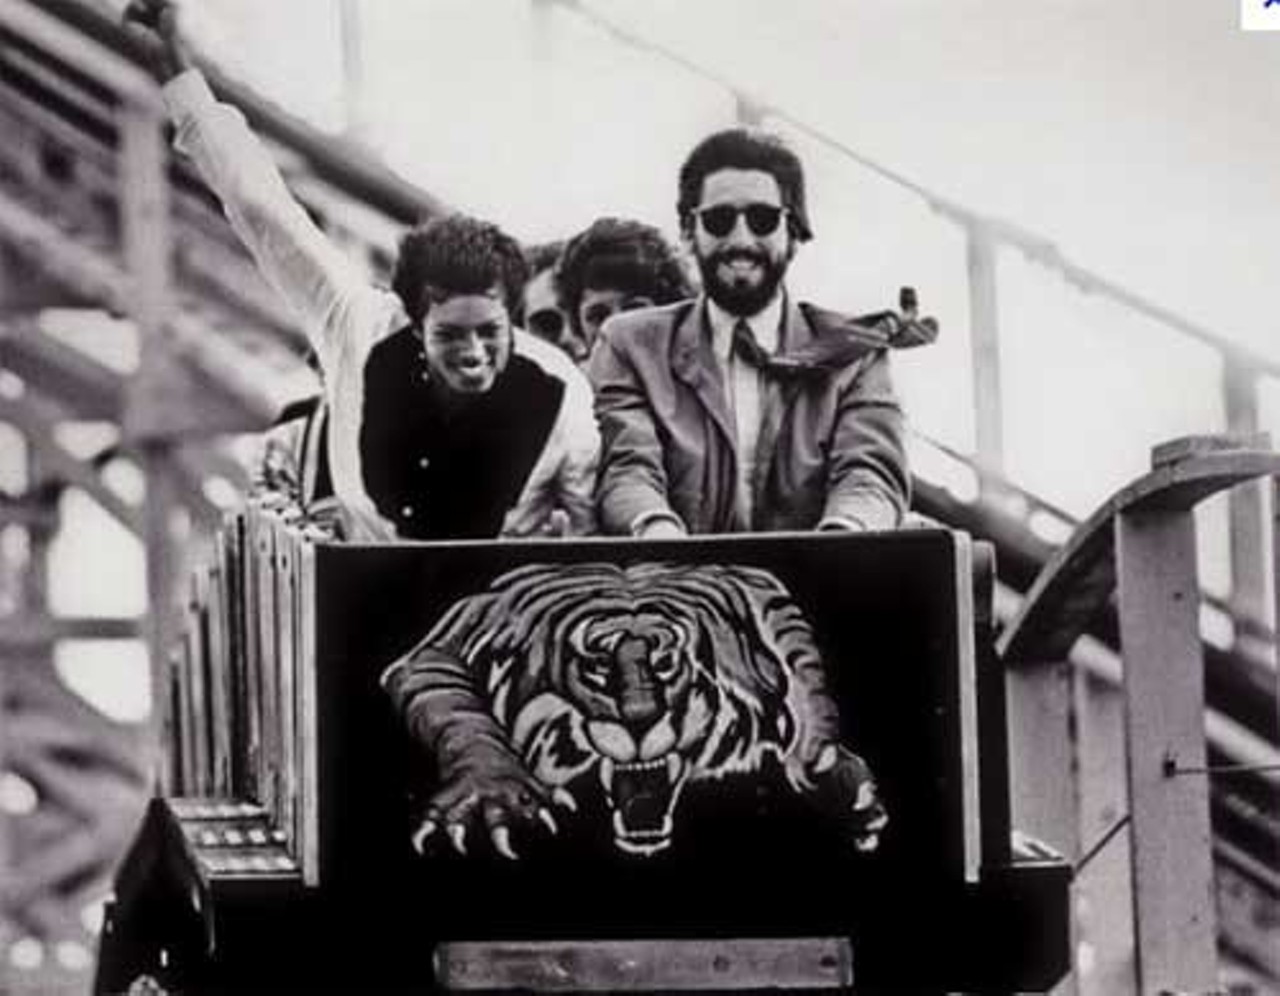 Every time he came to the area, he visited. Here he is riding the Roaring Tiger coaster with director John Landis. (via jimhillmedia.com)